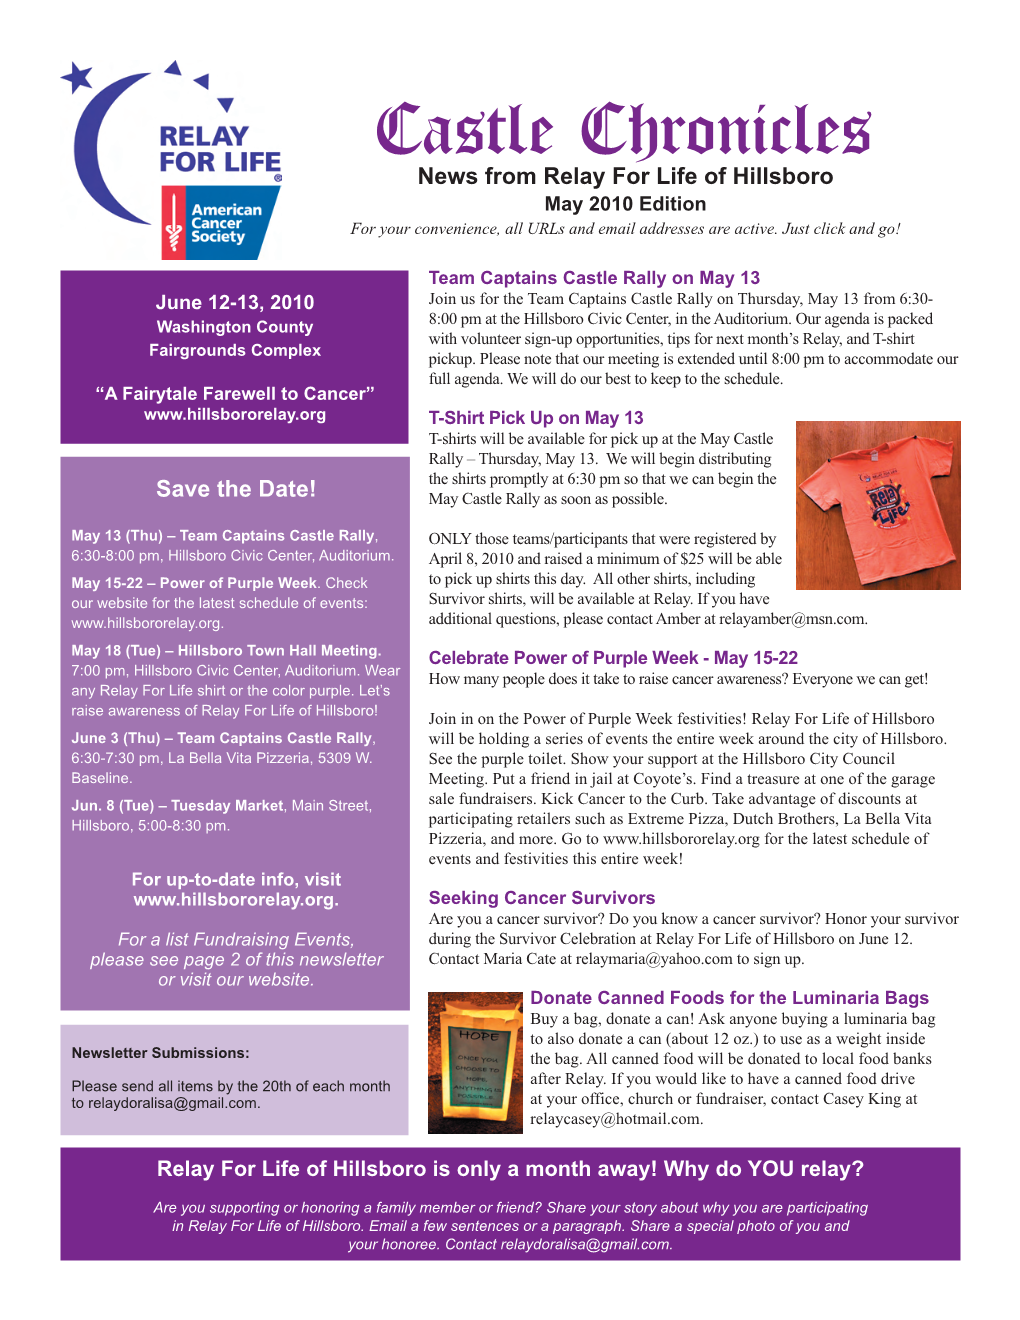 Castle Chronicles News from Relay for Life of Hillsboro May 2010 Edition for Your Convenience, All Urls and Email Addresses Are Active